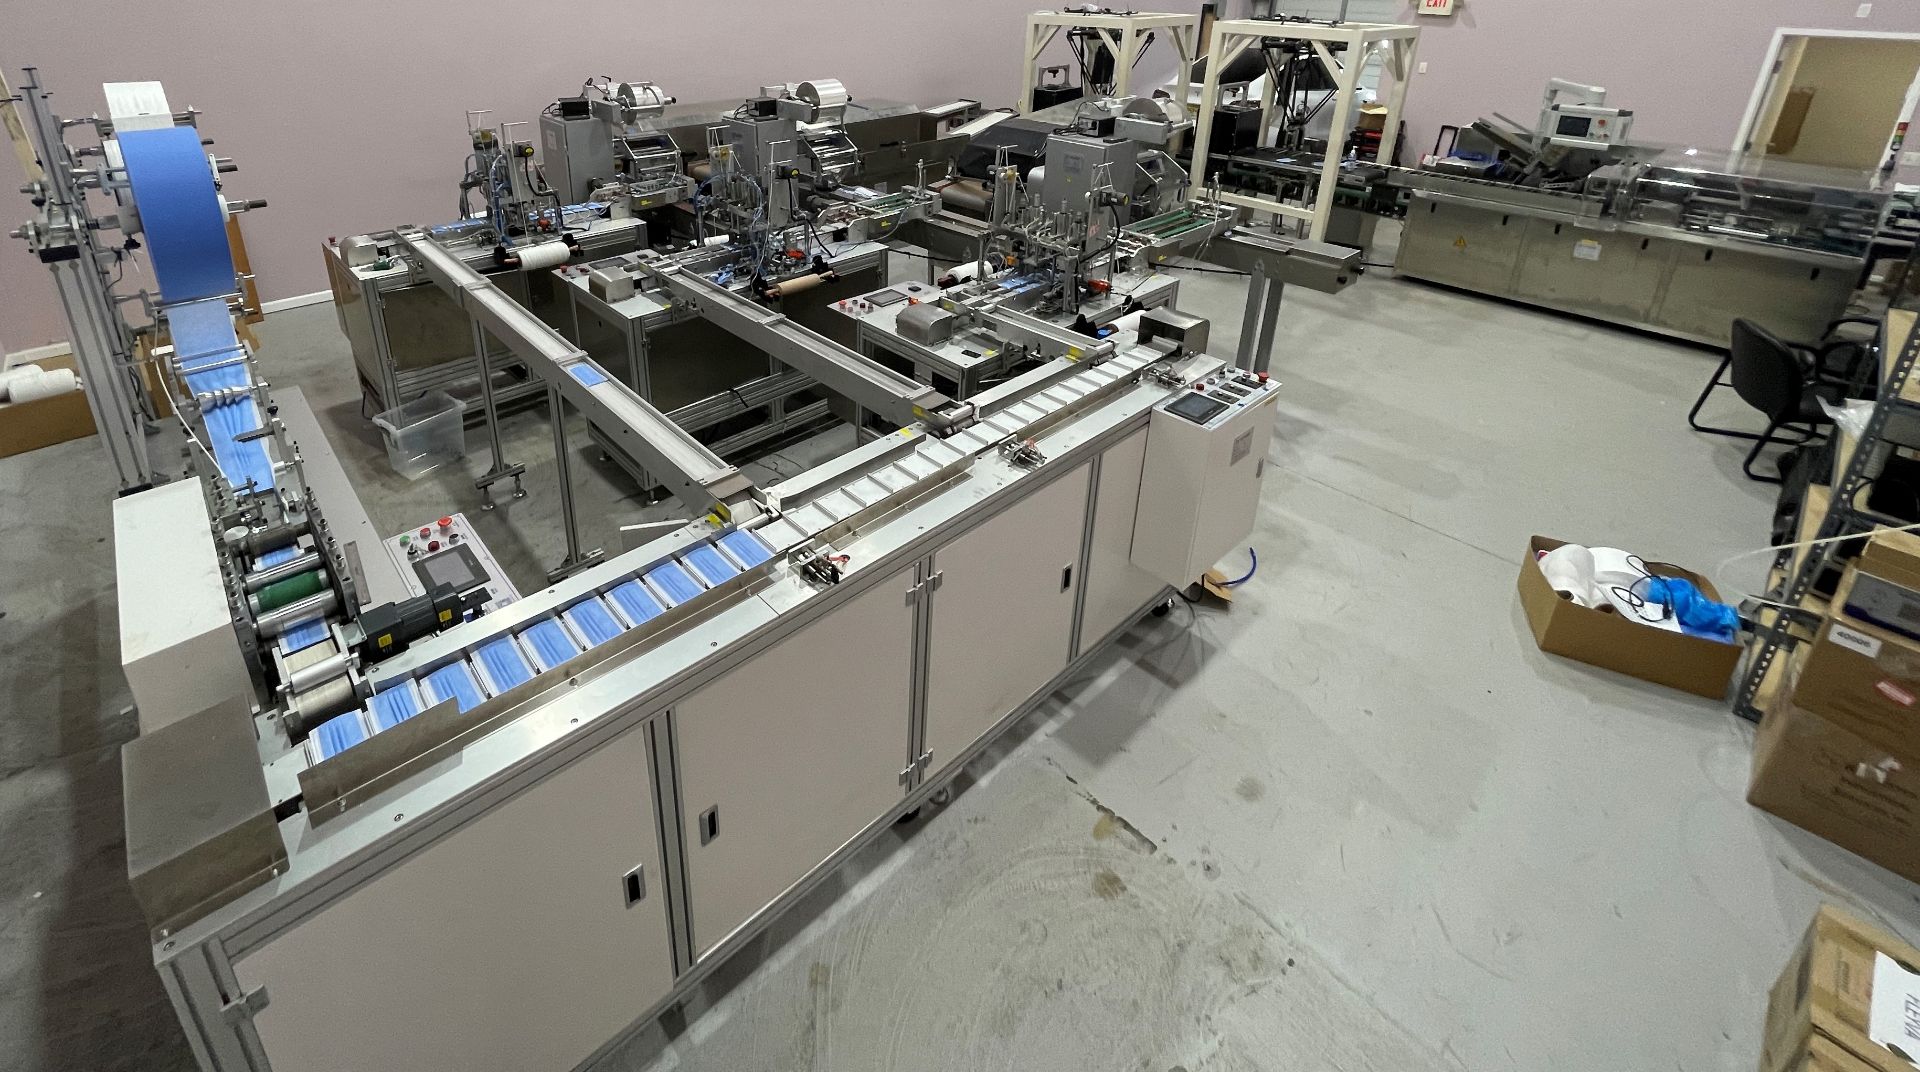 COMPLETE PACKAGE: 2020 3-Ply Disposable Medical Mask Assembly & Packaging Line Equipment, Includes: - Image 4 of 150